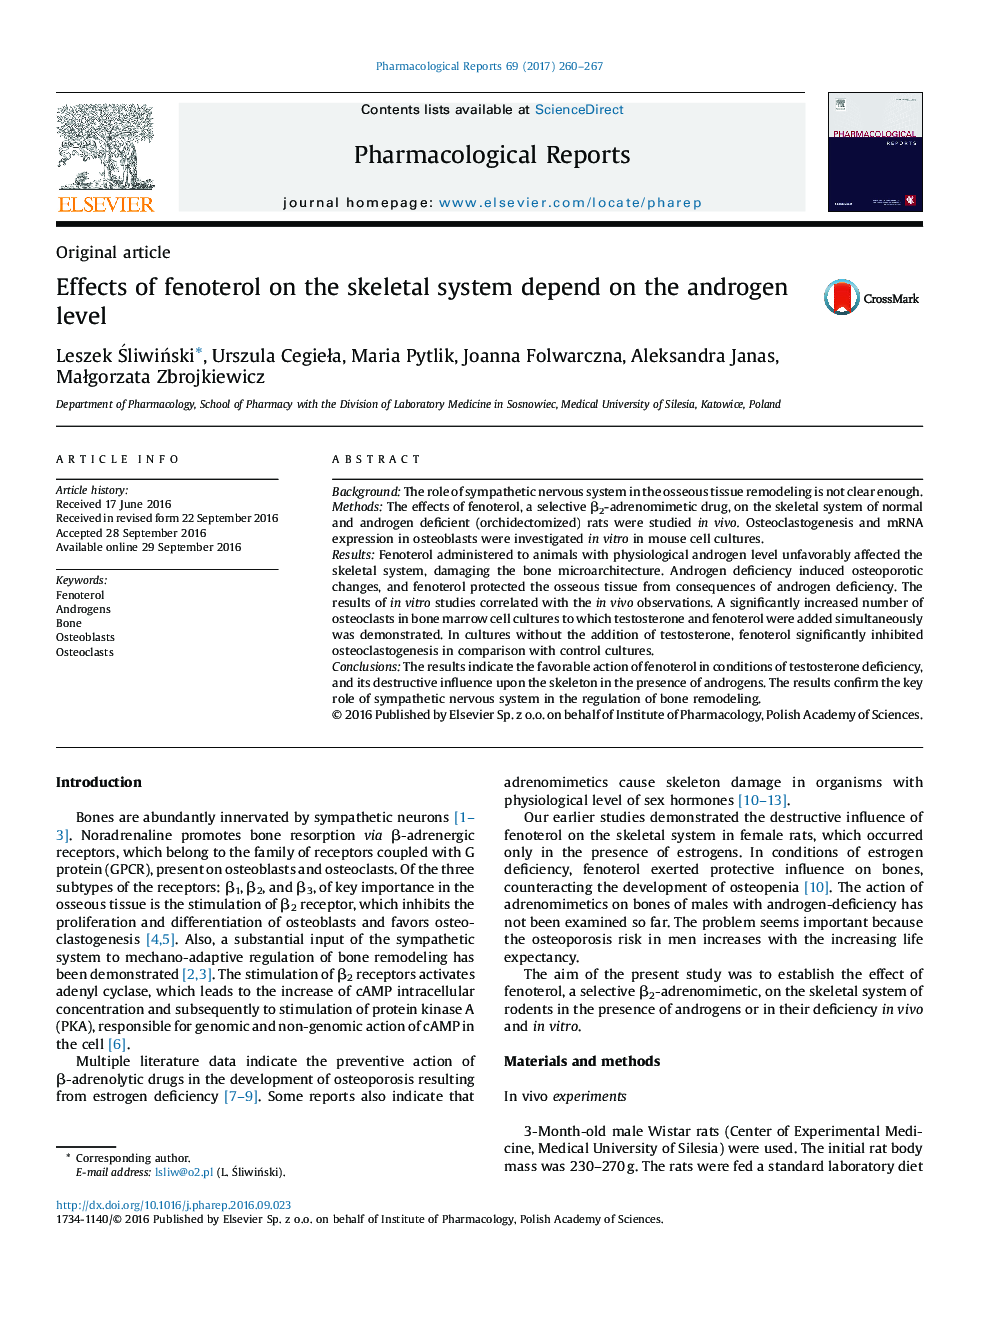 Original articleEffects of fenoterol on the skeletal system depend on the androgen level